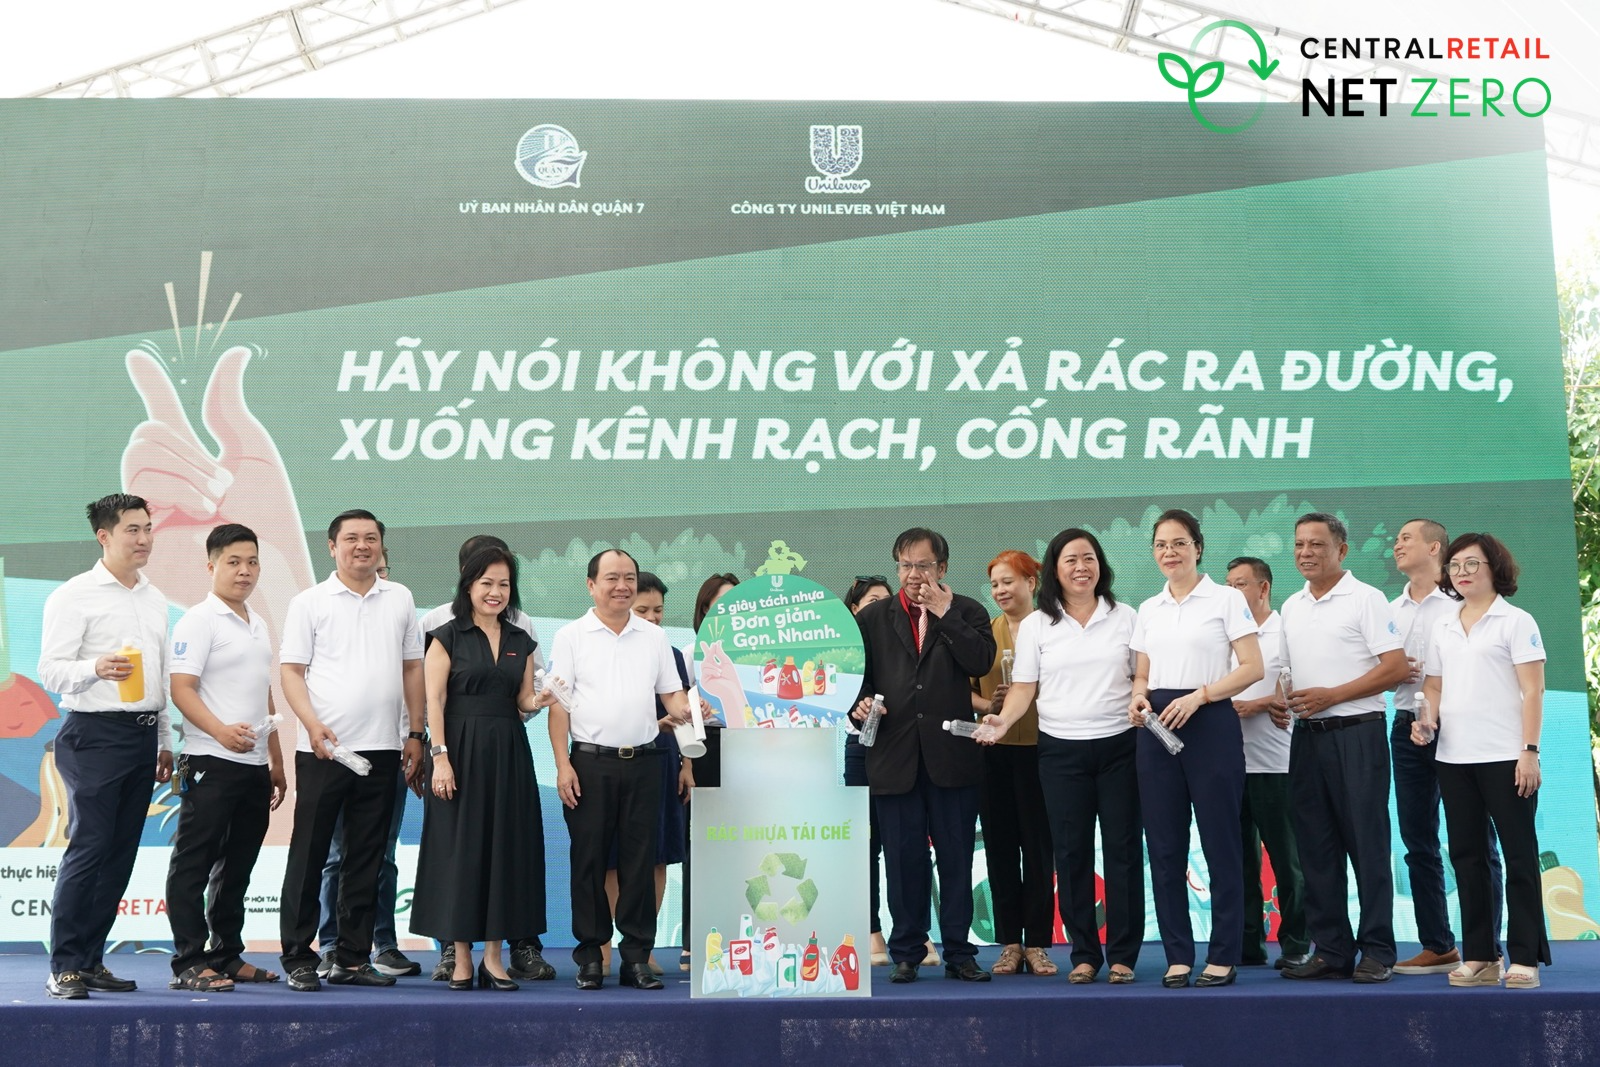 Central Retail in Vietnam joins hands with Unilever to raise public awareness about the importance of segregating plastic waste